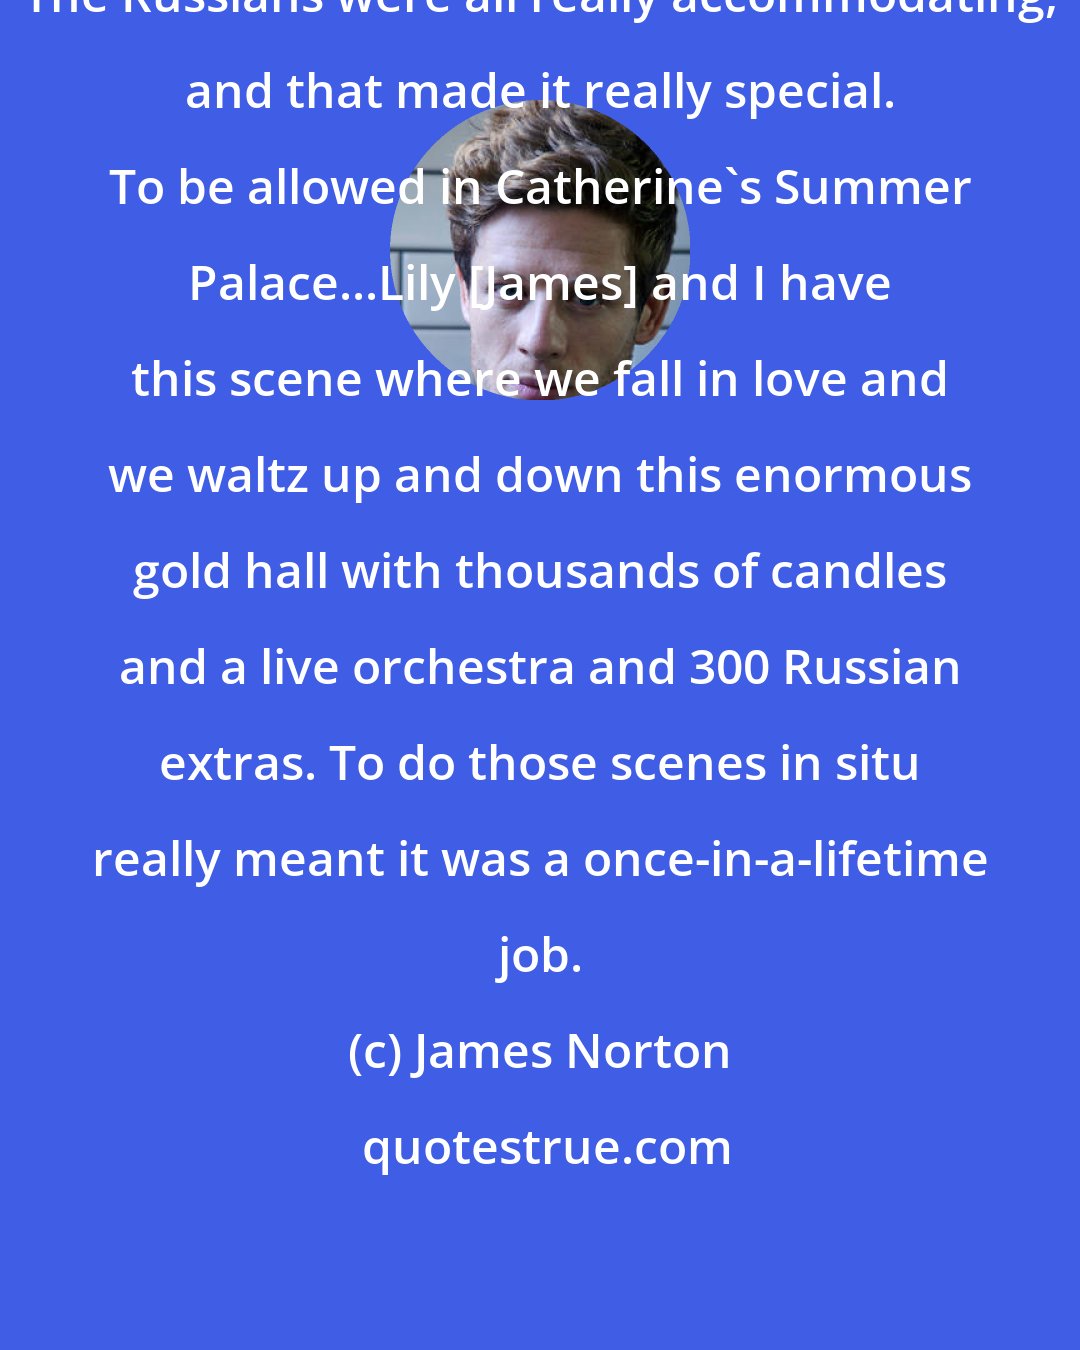 James Norton: The Russians were all really accommodating, and that made it really special. To be allowed in Catherine's Summer Palace...Lily [James] and I have this scene where we fall in love and we waltz up and down this enormous gold hall with thousands of candles and a live orchestra and 300 Russian extras. To do those scenes in situ really meant it was a once-in-a-lifetime job.